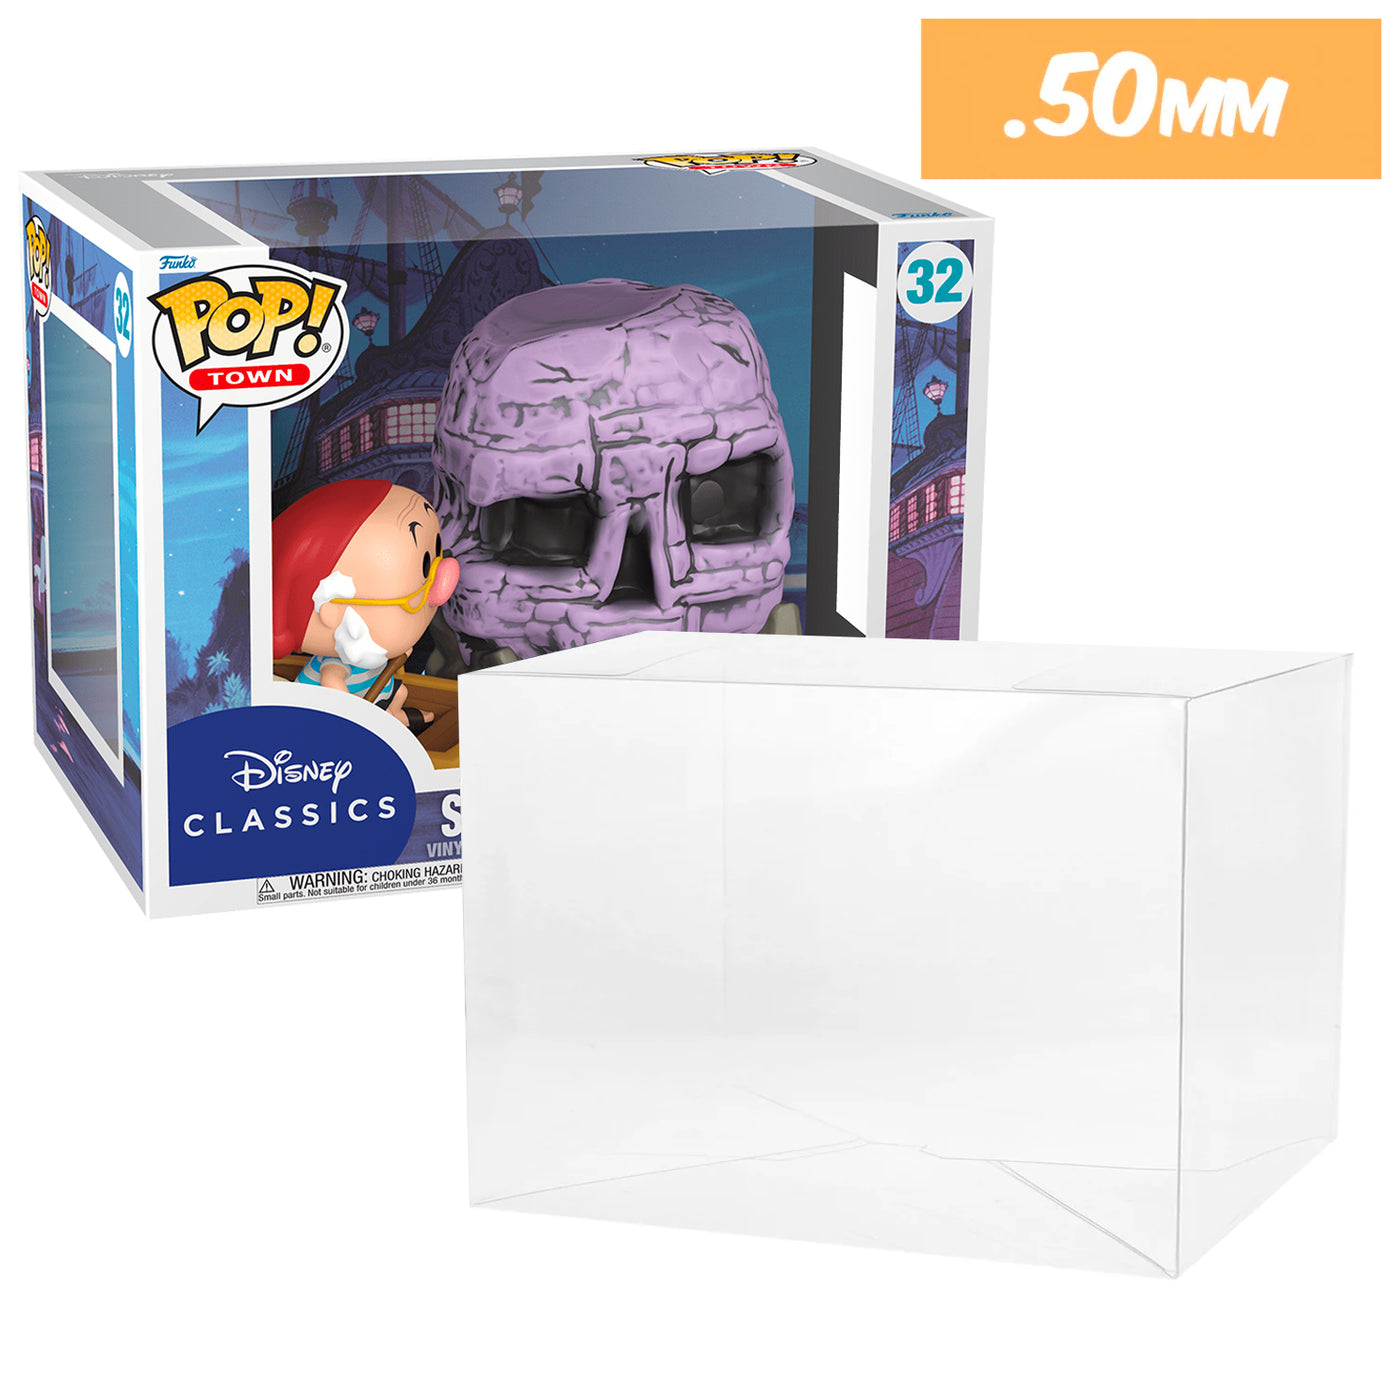 Smee with Skull Rock NYCC pop town best funko pop protectors thick strong uv scratch flat top stack vinyl display geek plastic shield vaulted eco armor fits collect protect display case kollector protector